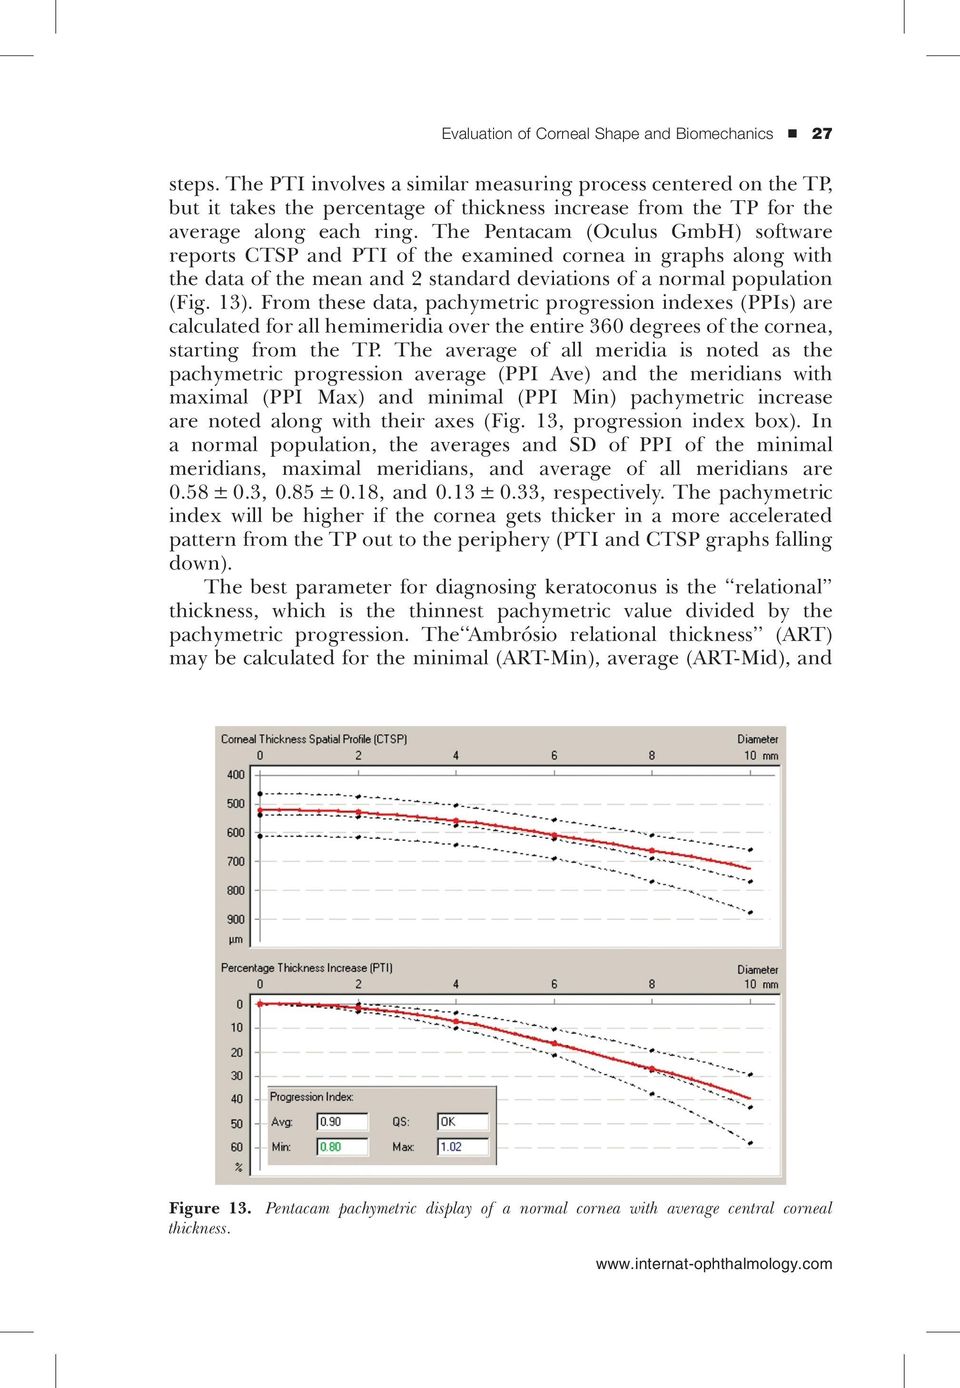 The Pentacam (Oculus GmbH) software reports CTSP and PTI of the examined cornea in graphs along with the data of the mean and 2 standard deviations of a normal population (Fig. 13).